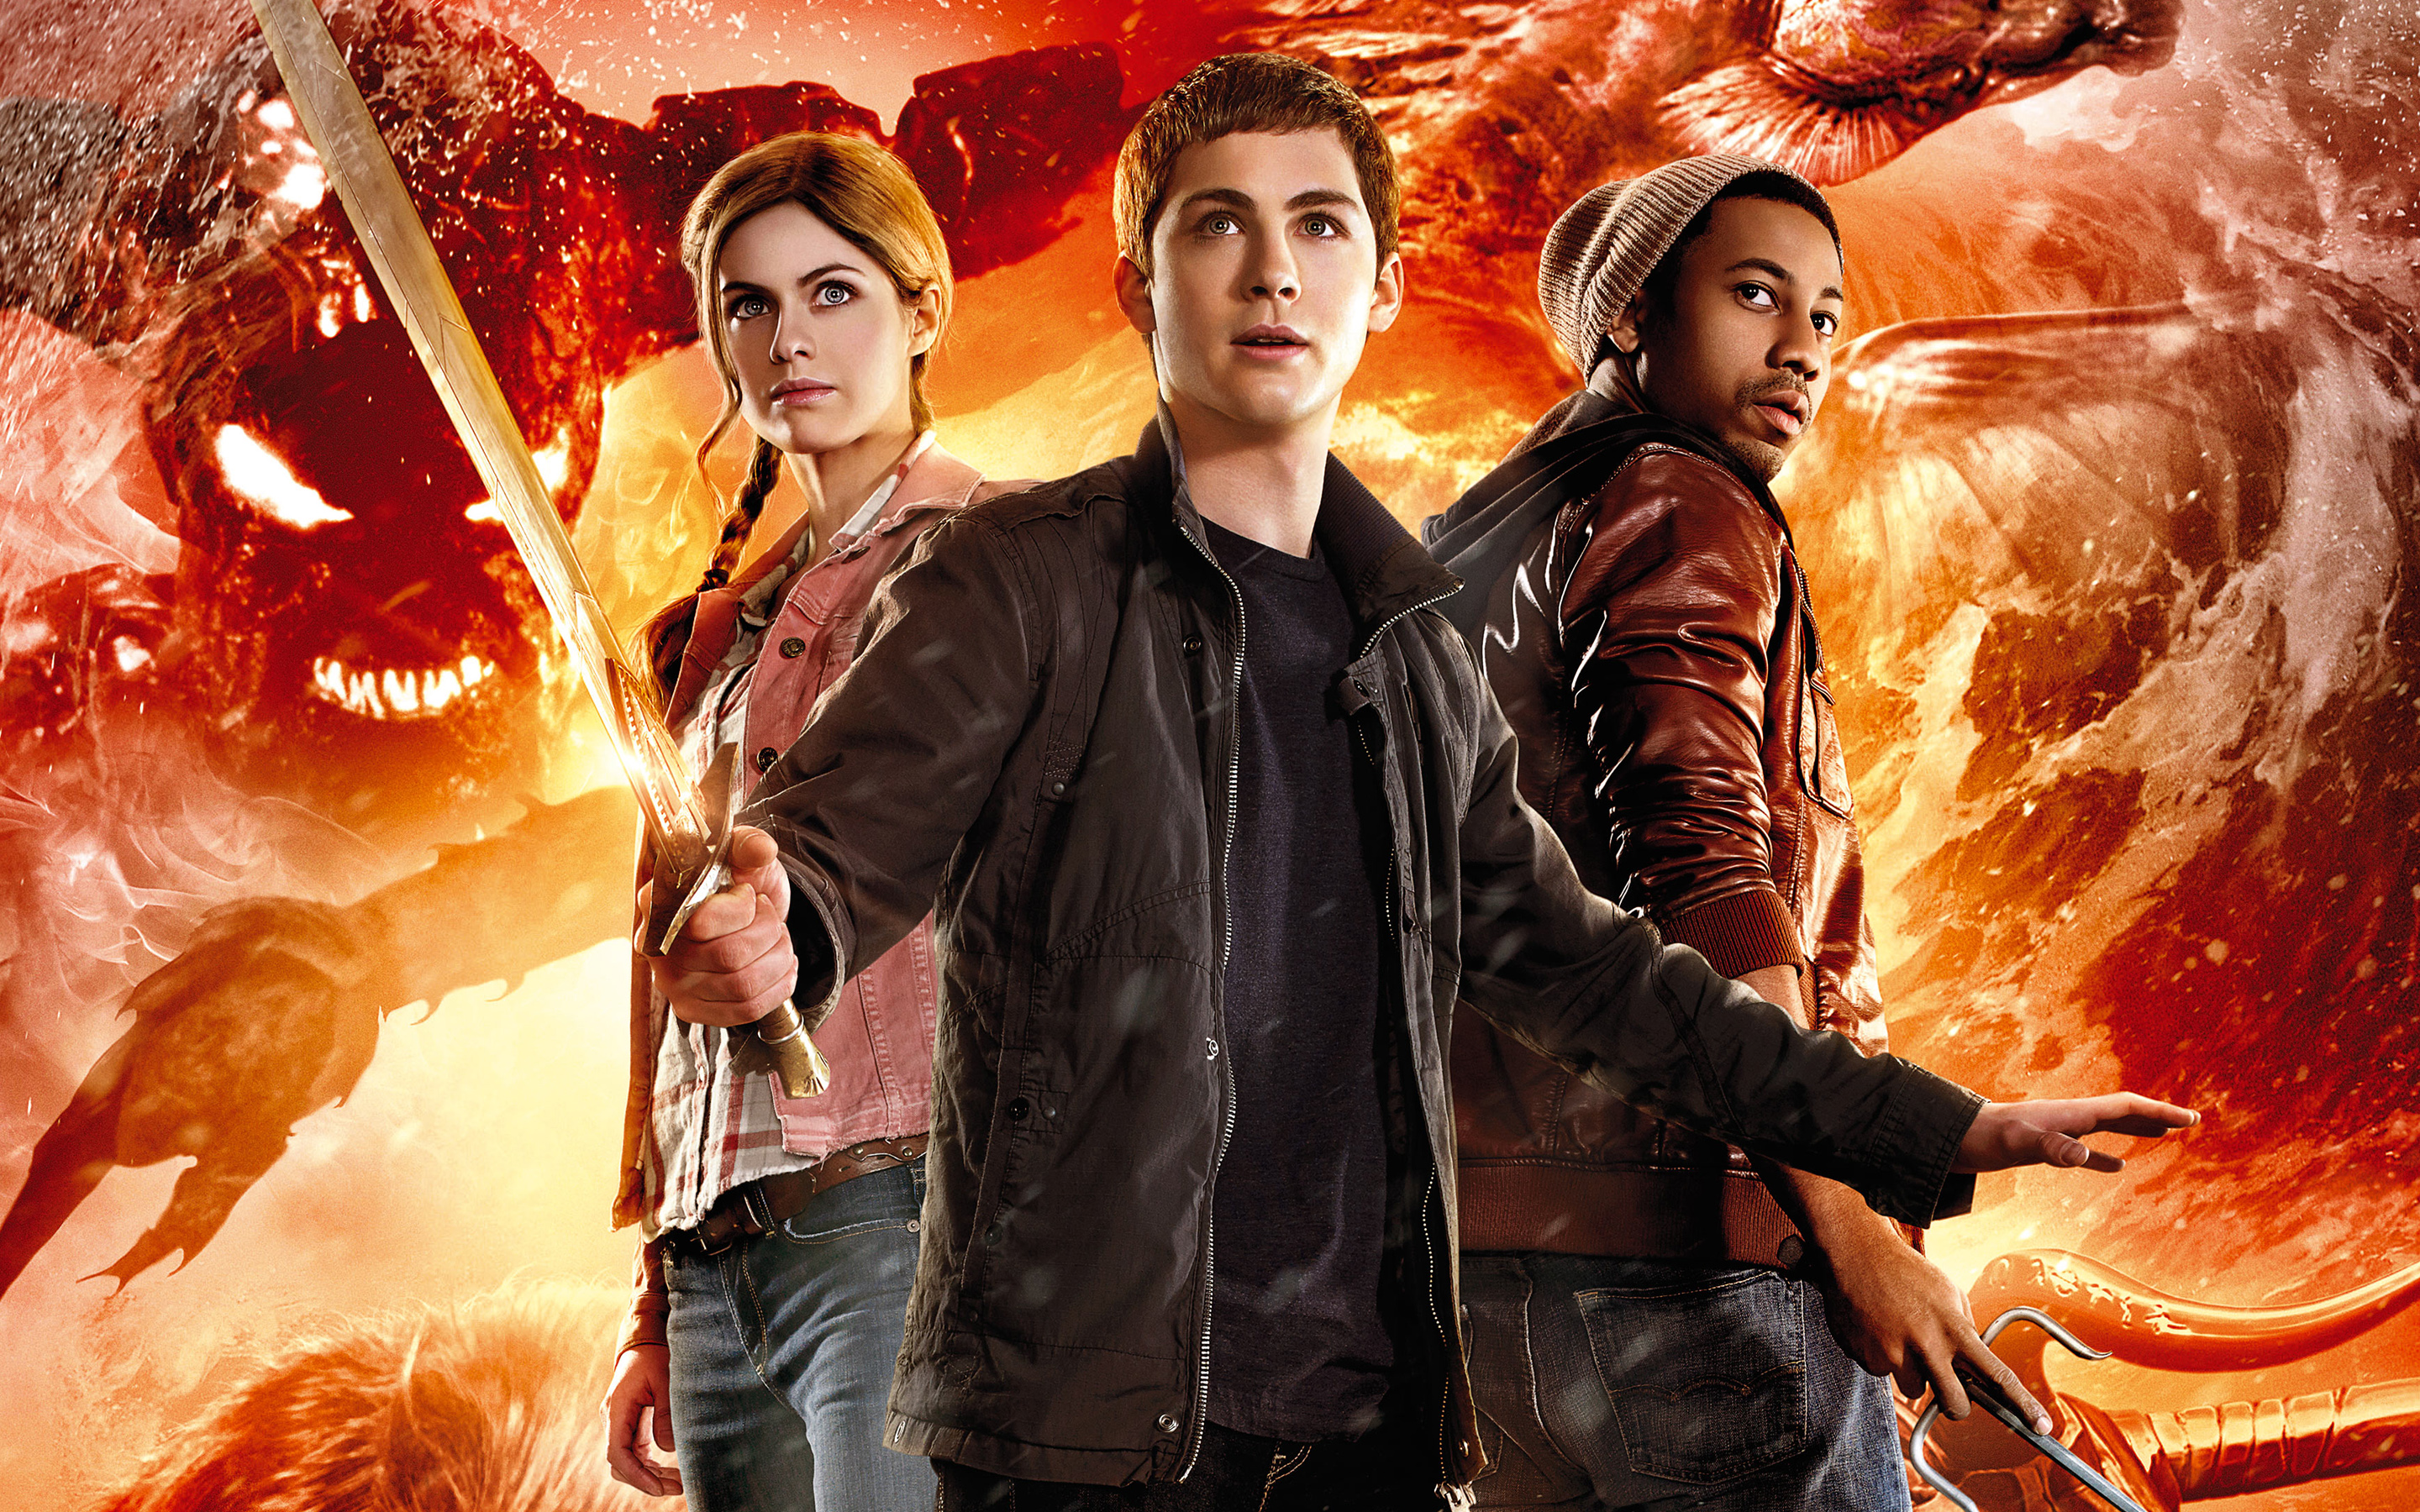 Percy Jackson: Sea Of Monsters Backgrounds, Compatible - PC, Mobile, Gadgets| 2880x1800 px